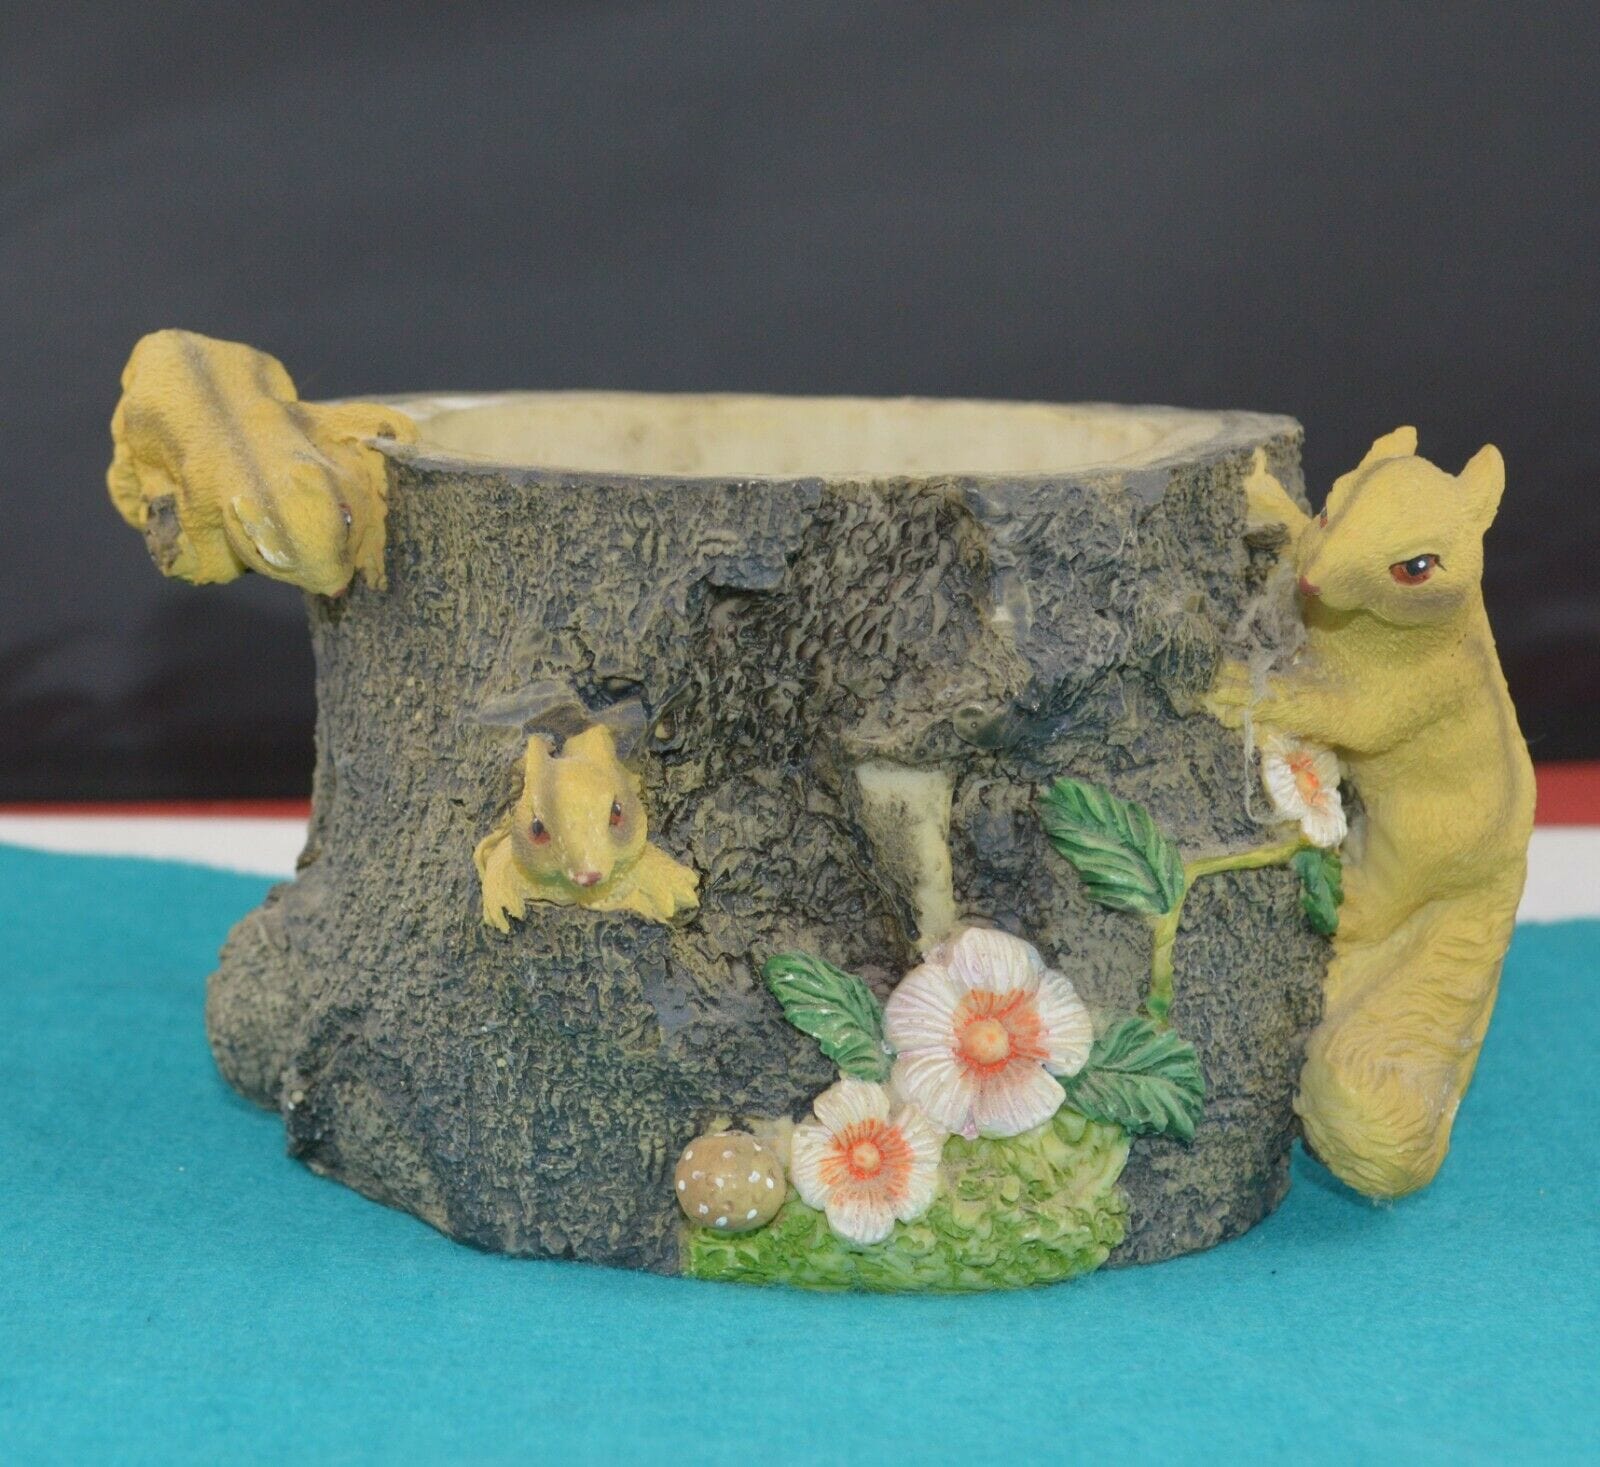 PLANTER DECORATED WITH SQUIRRELS AND FLOWERS(PREVIOUSLY OWNED) GOOD CONDITION - TMD167207